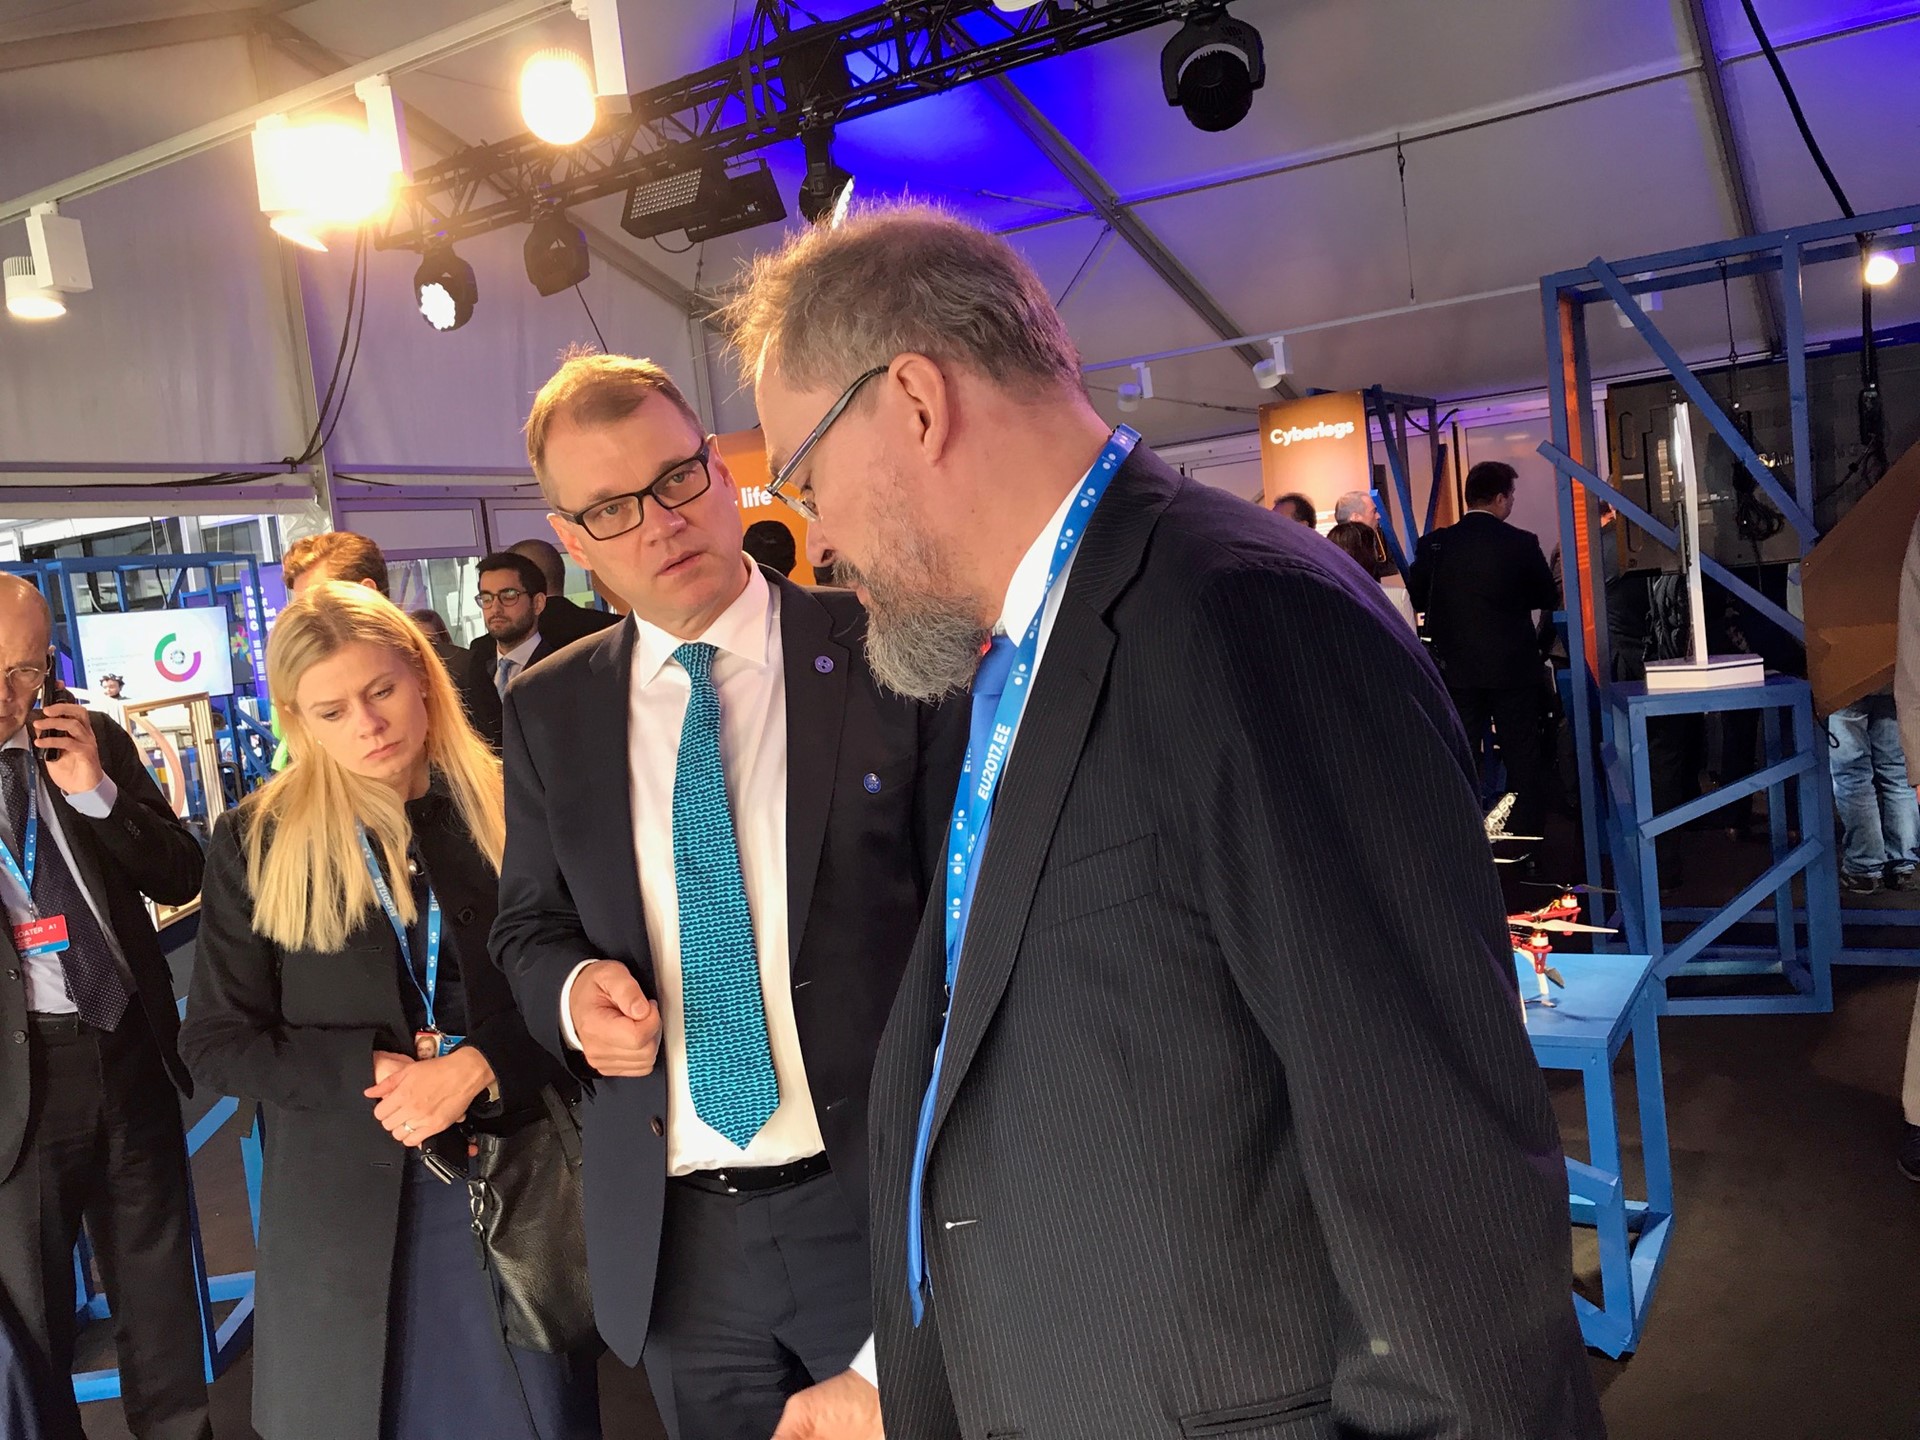 The Graphene Flagship Director meets the Finnish Prime Minister